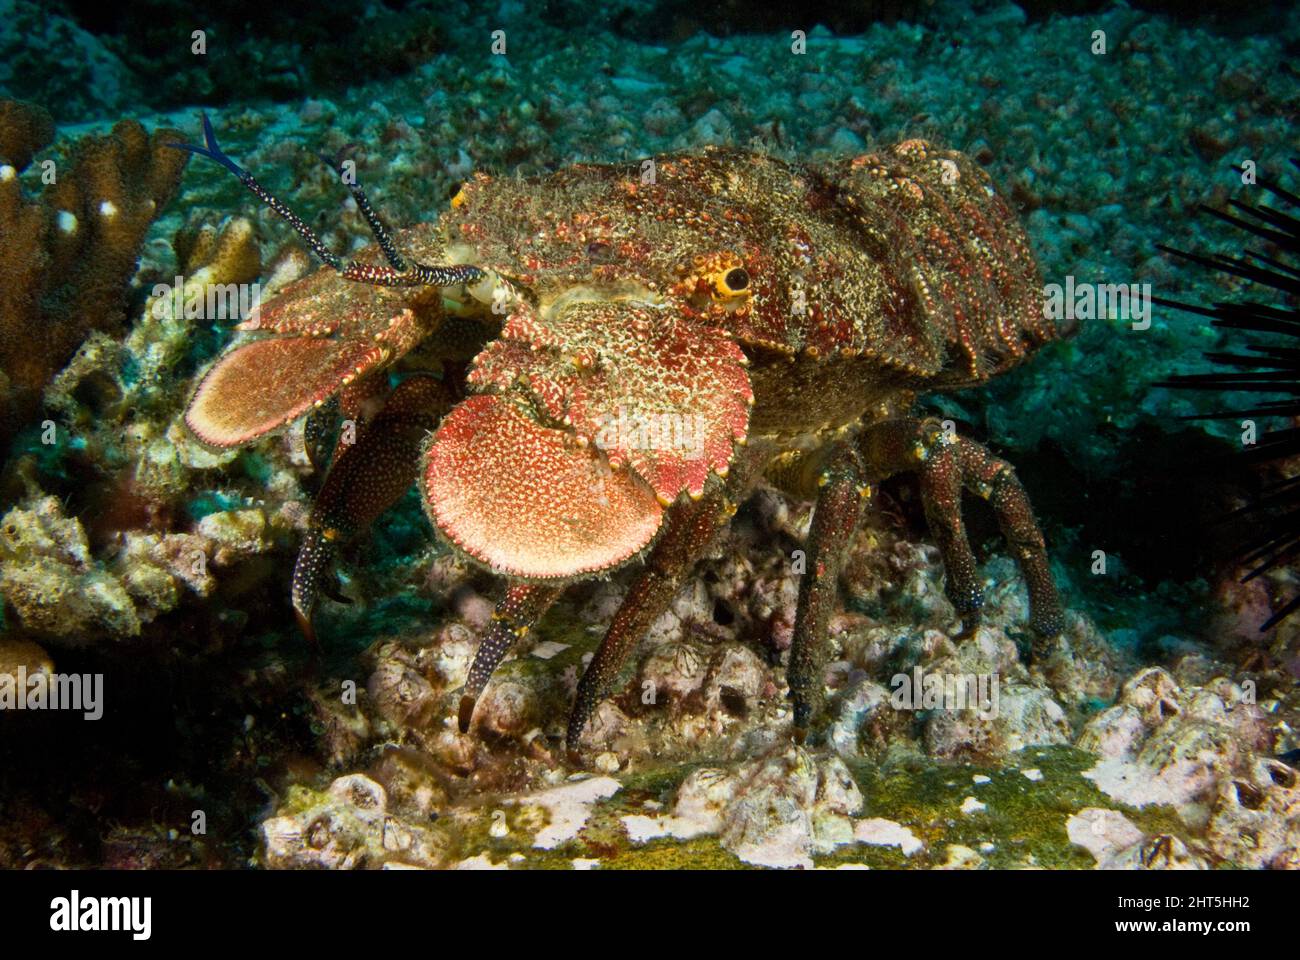 Slipper lobster. Arctides antipodarum.This species hides during the day and comes out at night to hunt. Solitary Islands Marine Park, New South Wales Stock Photo